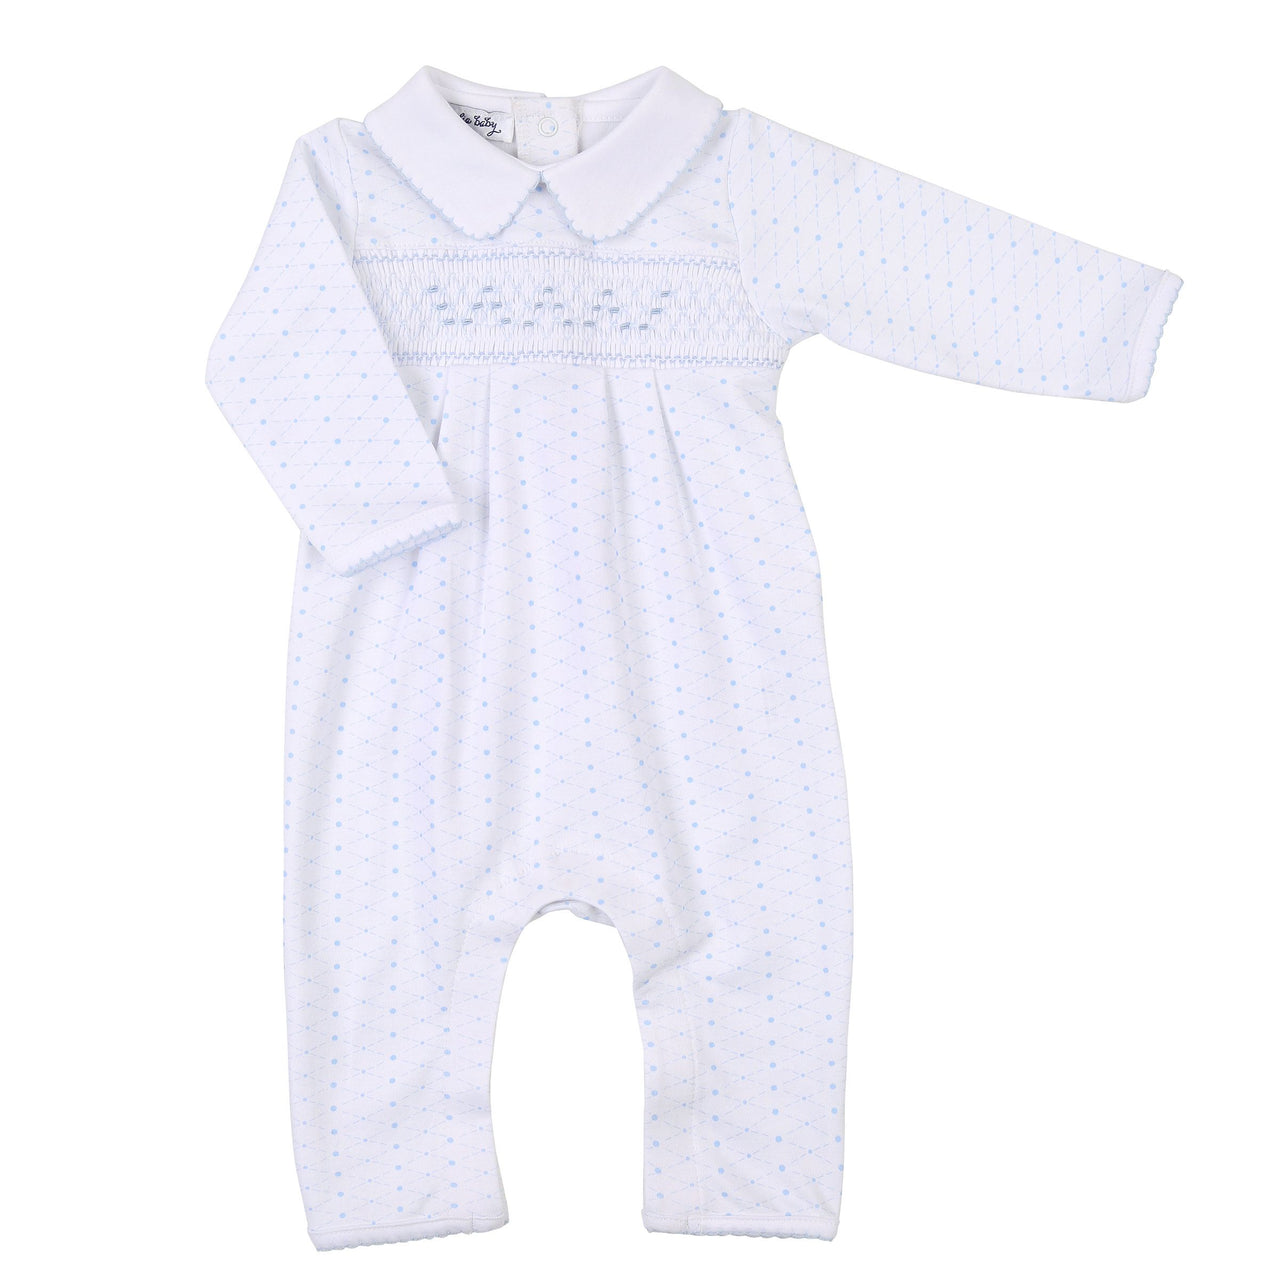 Magnolia Baby Spring Riley and Ryan Smocked Collared Playsuit 1117-891 5004